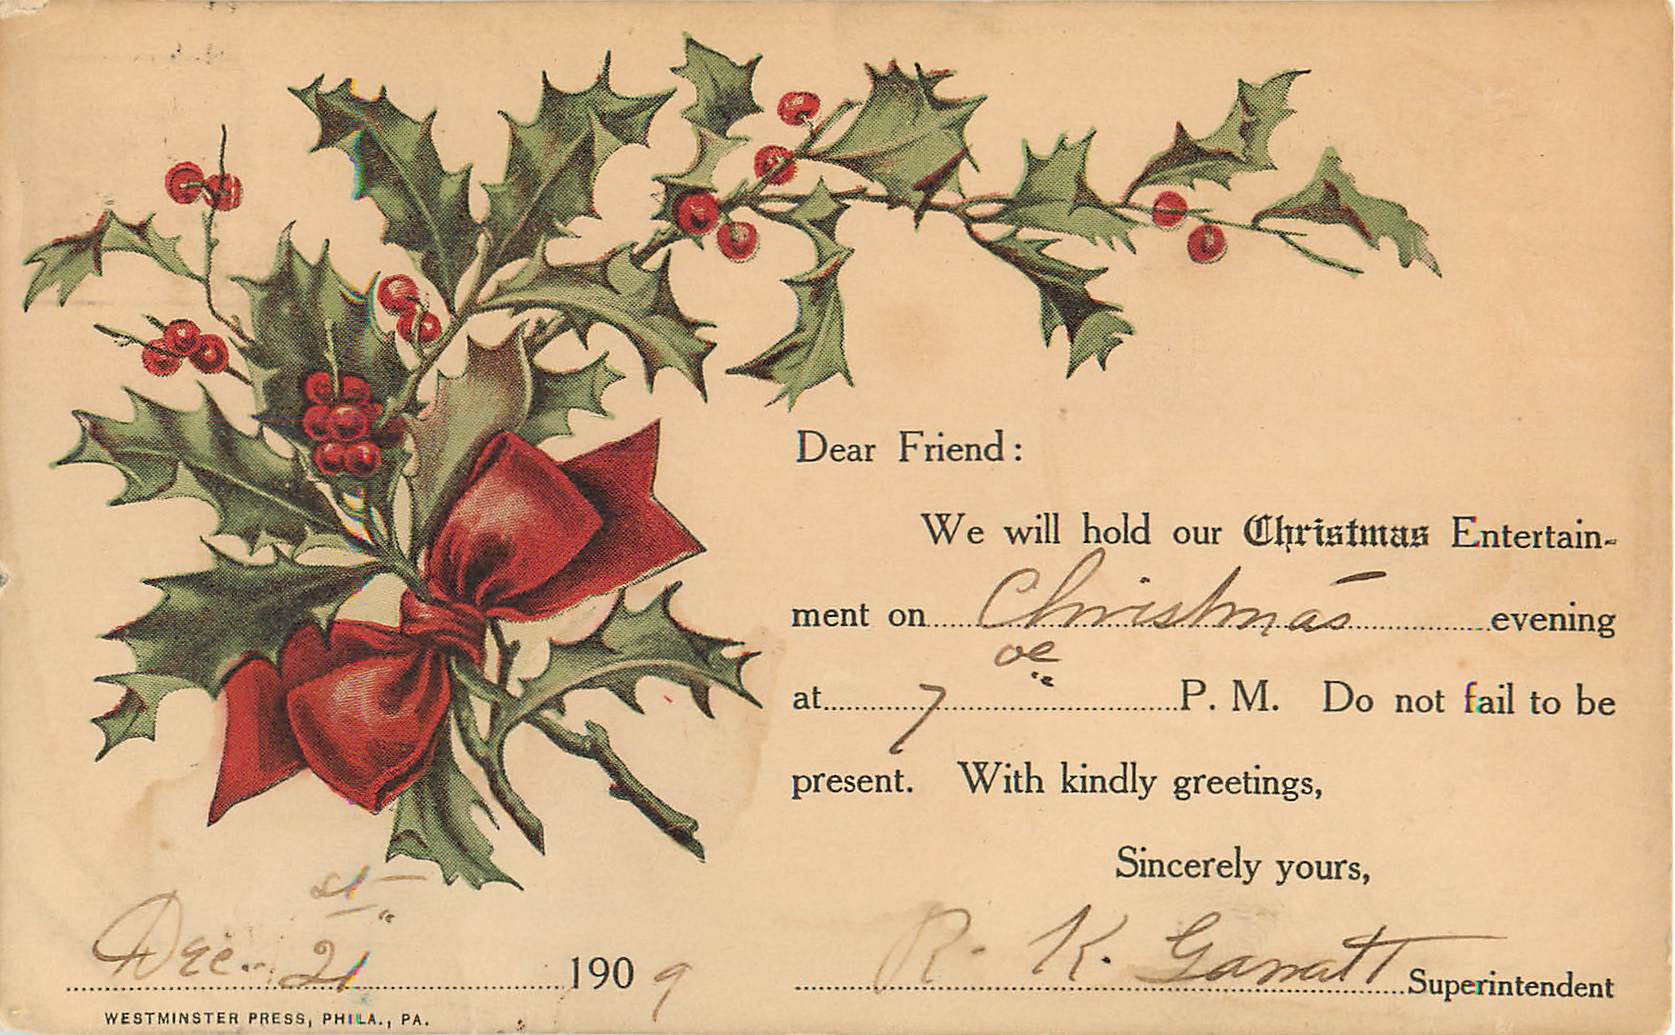 Christmas Entertainment Appointment Card